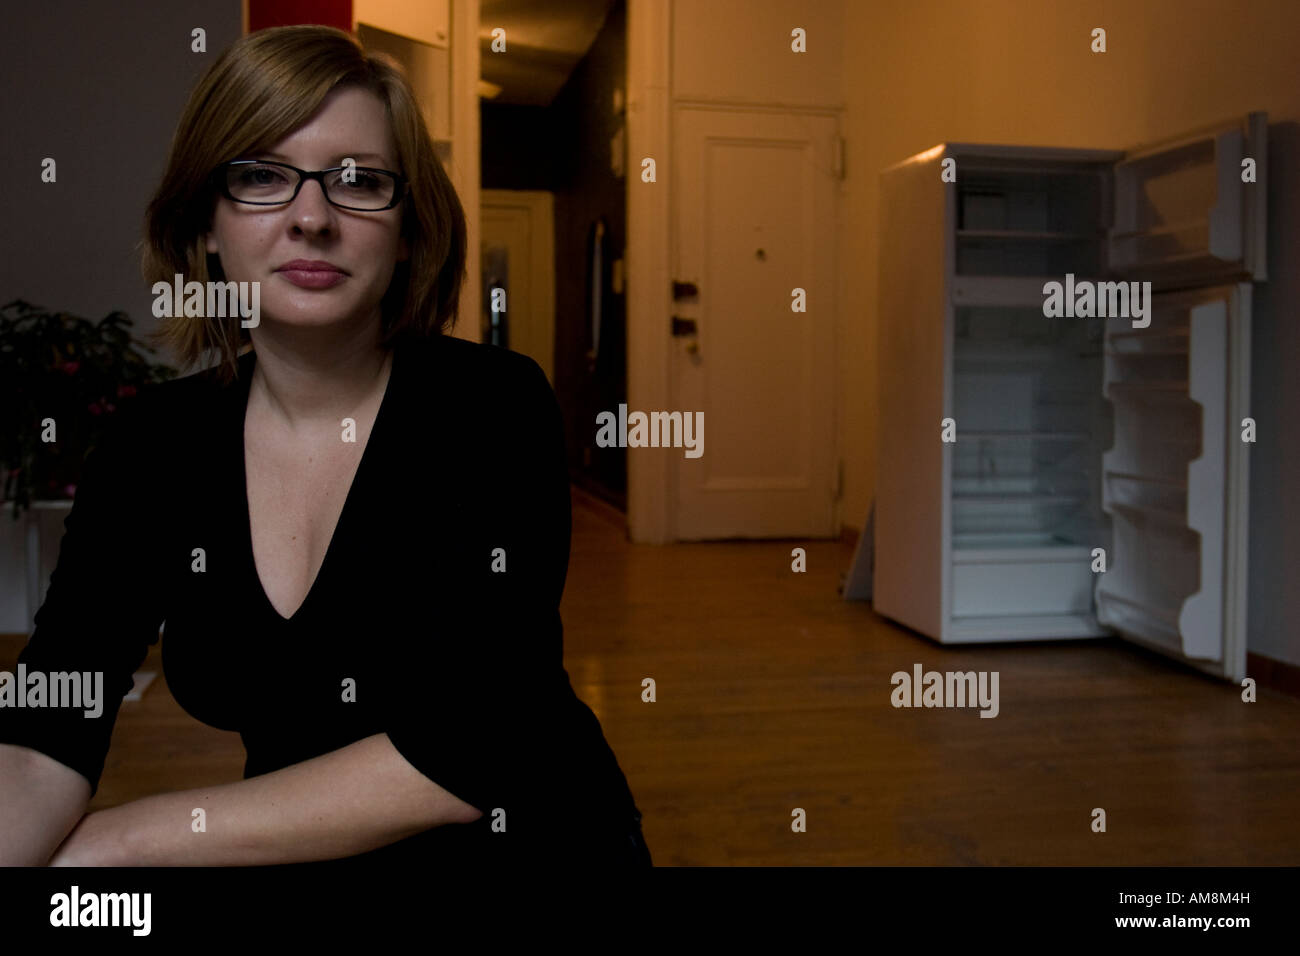 woman with red hair in an empty new york apartment, wearing black rimmed glasses Stock Photo